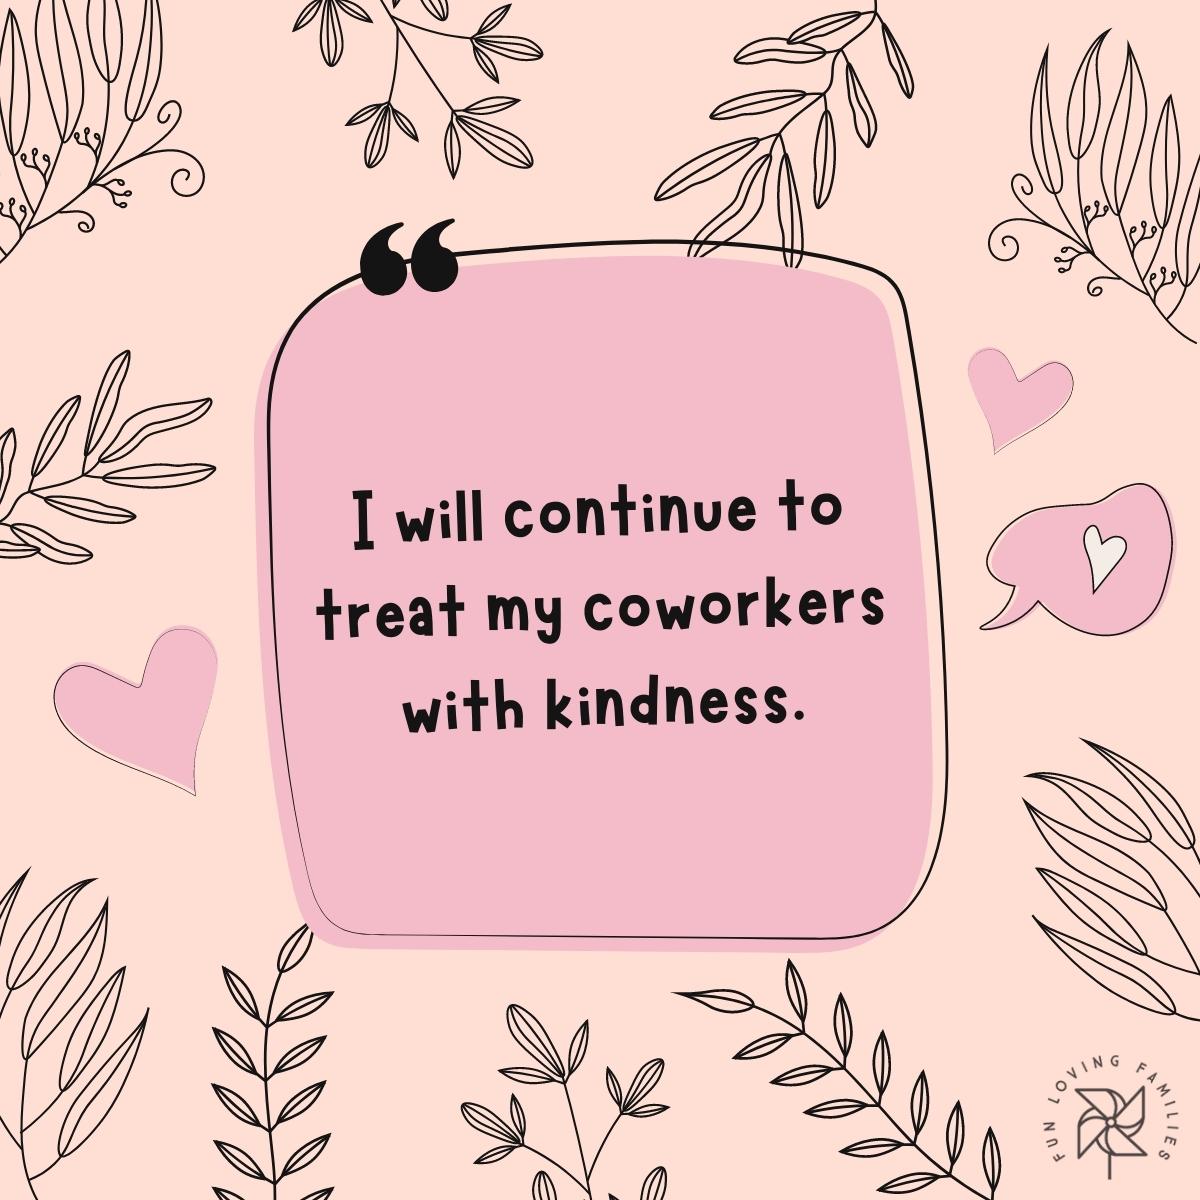 I will continue to treat my coworkers with kindness affirmation